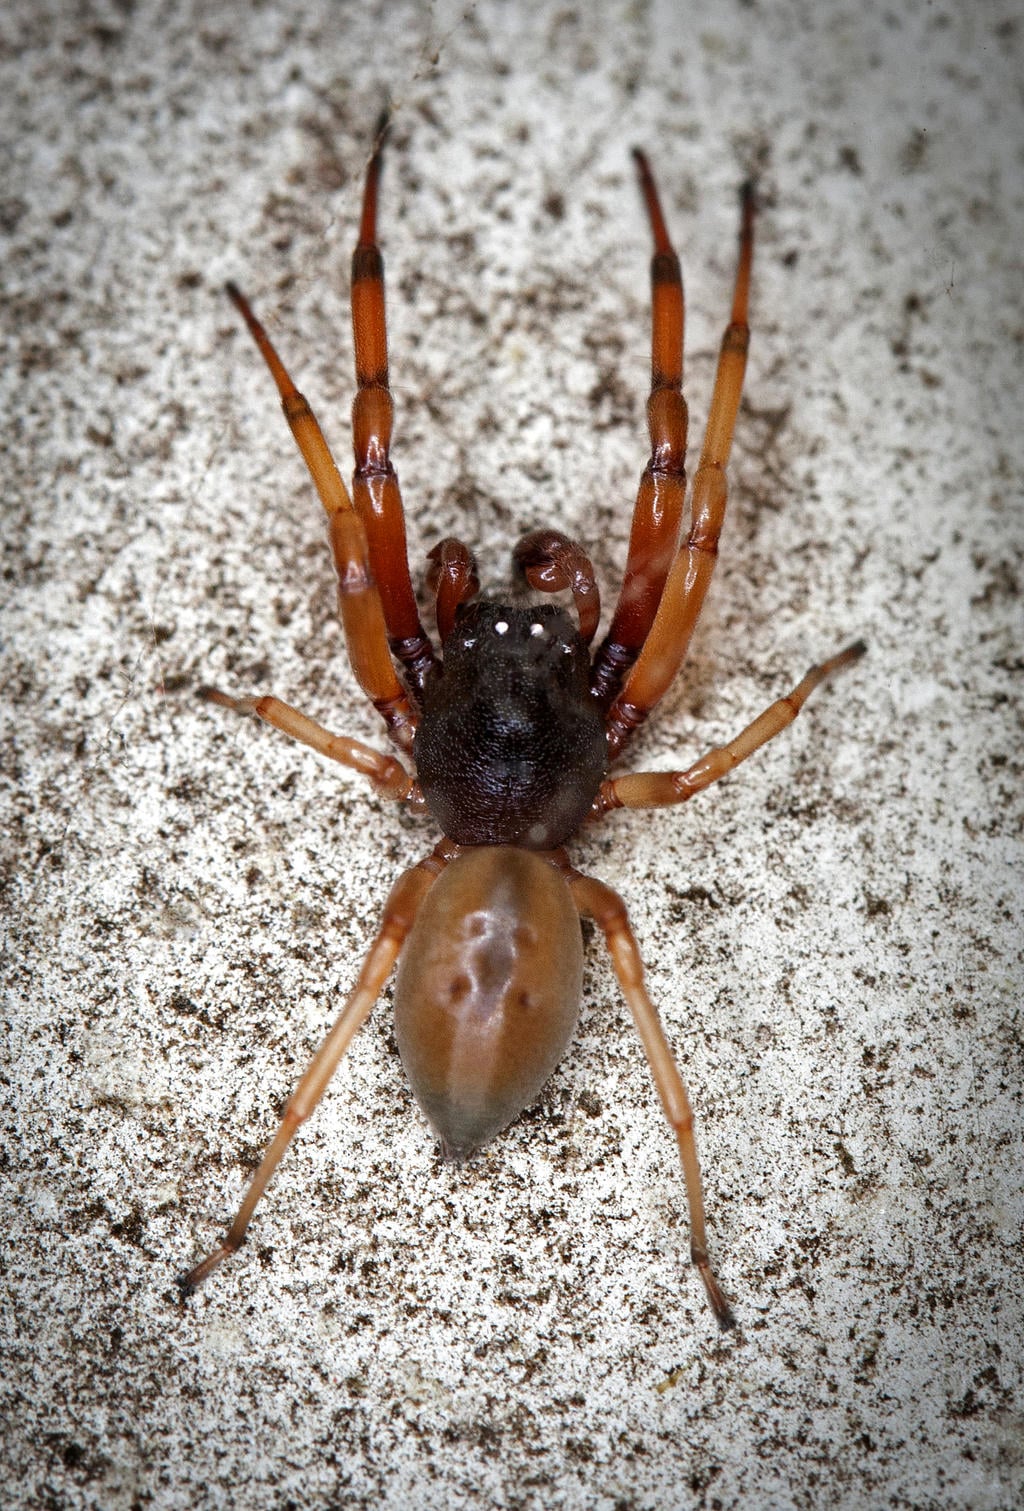 Broad-Faced Sac Spider